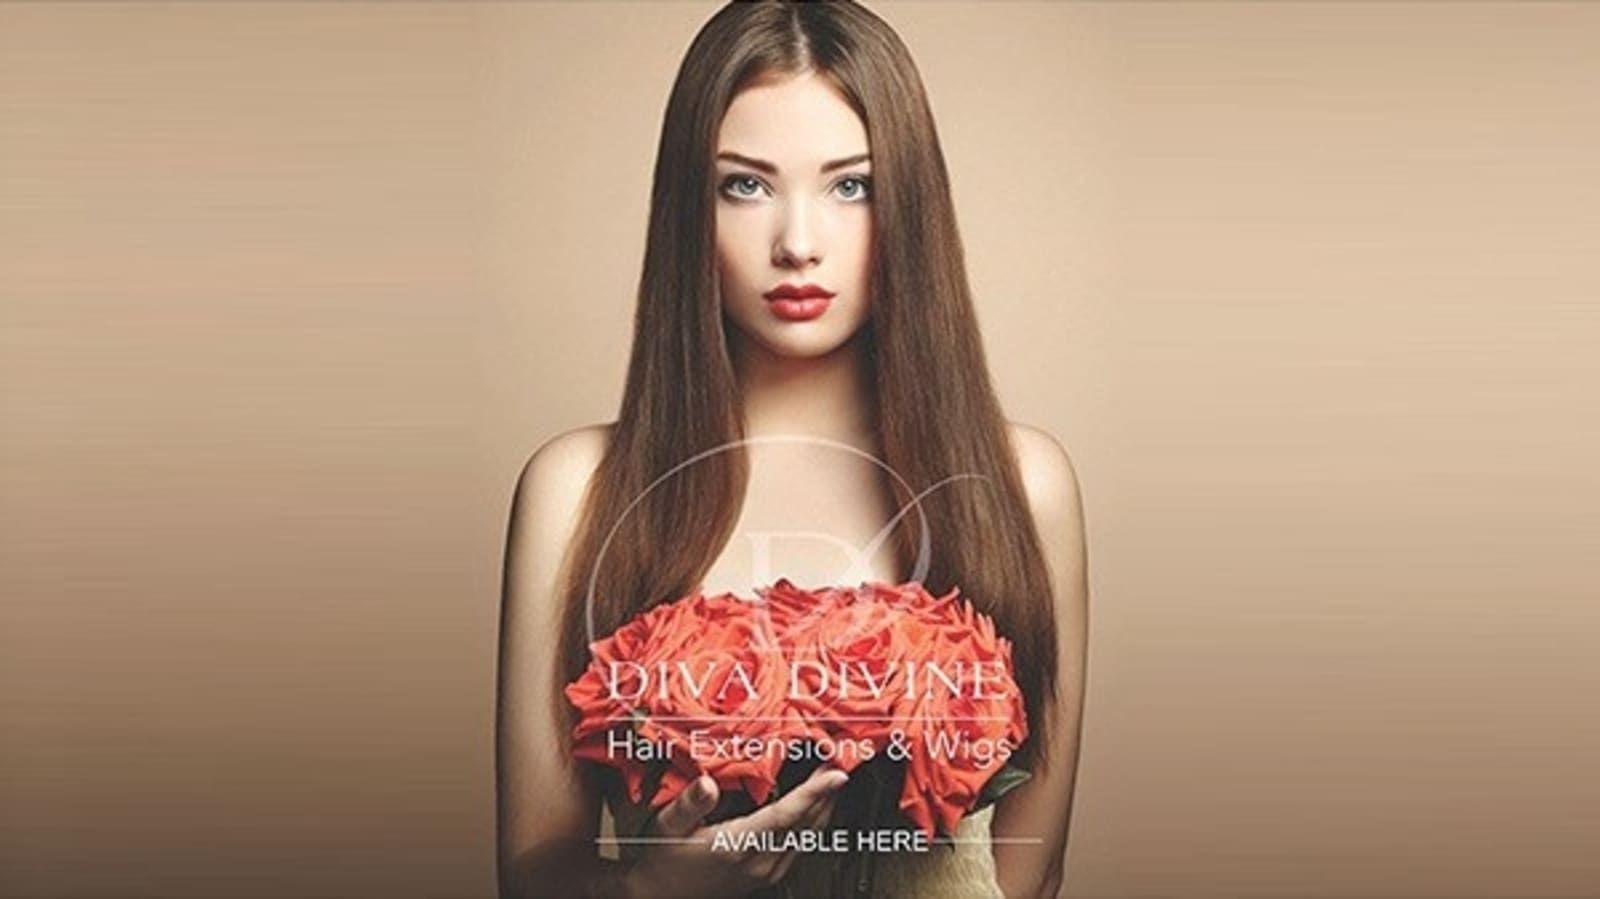 6 Reasons To Try Diva Divine Hair Extensions